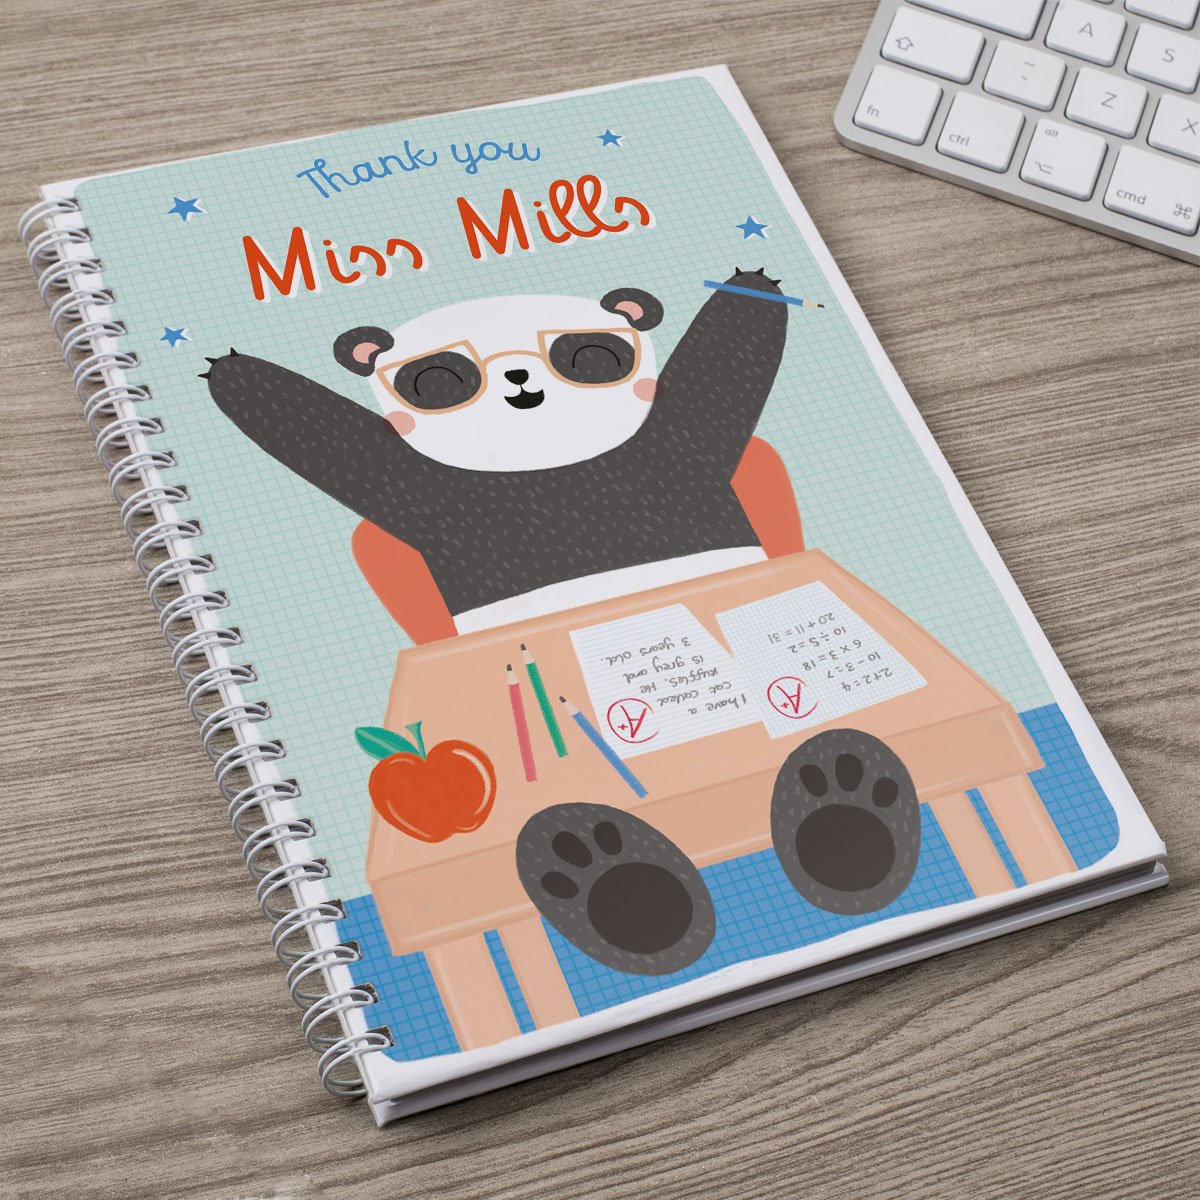 Personalised Thank You Teacher Notebook - Thank You Panda